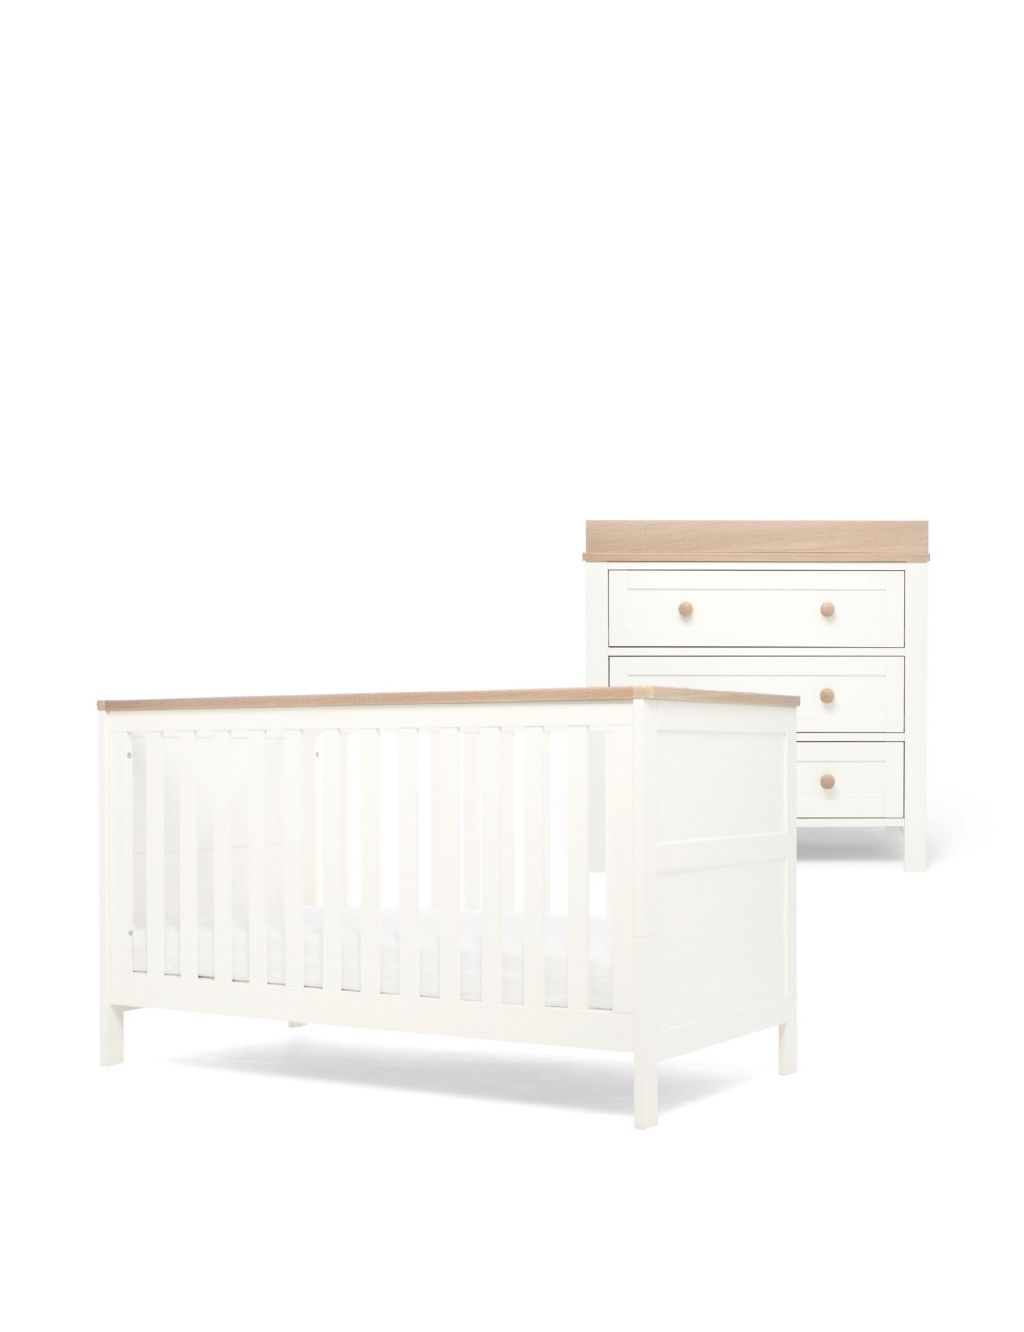 Wedmore 2 Piece Cotbed Set with Dresser image 1